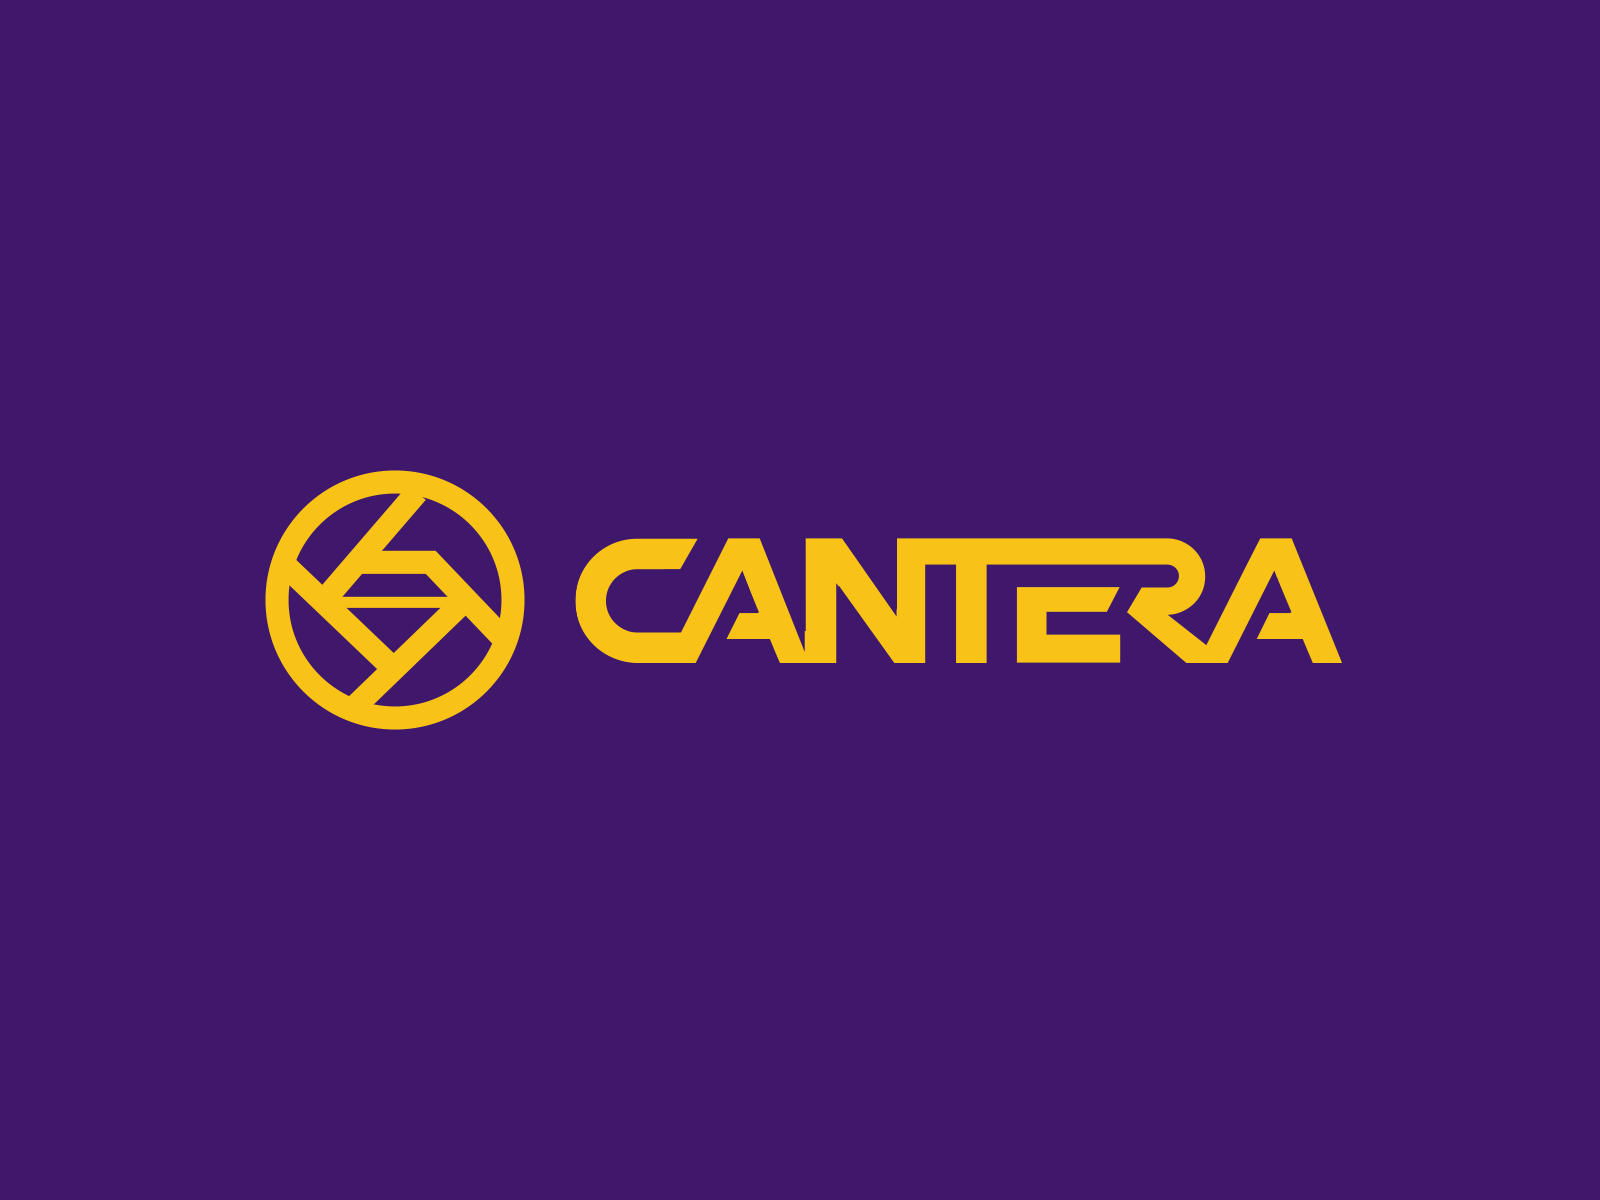 Cantera Logo Animation by André Castro on Dribbble